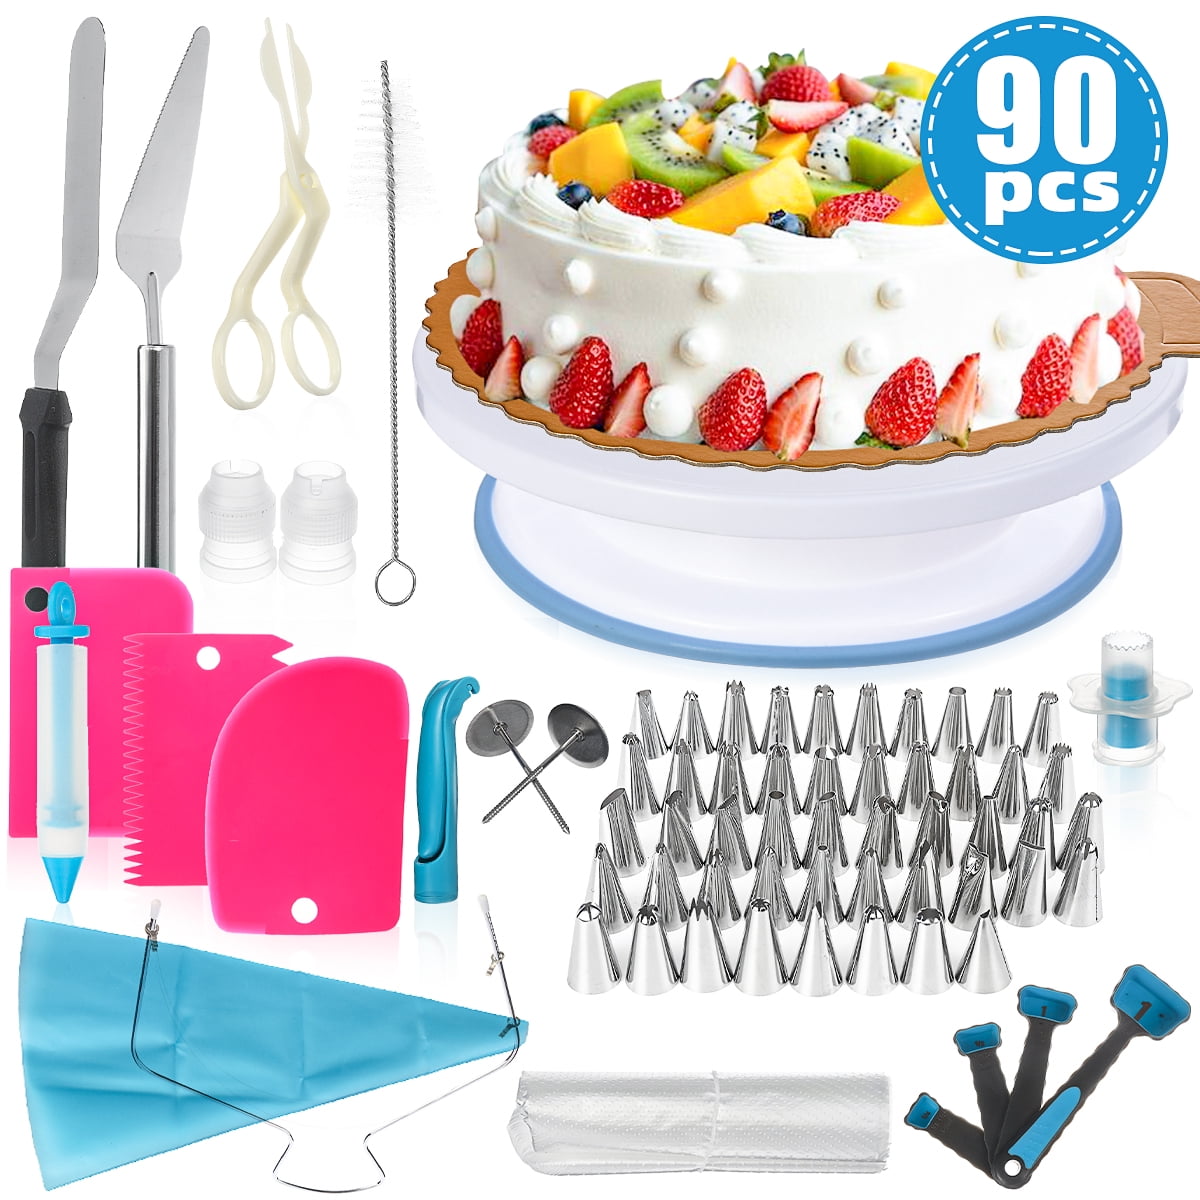 54 Icing Tips and Frosting Tools for Cake DIY SHEANAON Cake Decorating Equipment 106pcs Cake Decorating Set Cupcake Decorating Kit Baking Supplies with Nonslip Turntable Rotating Stand